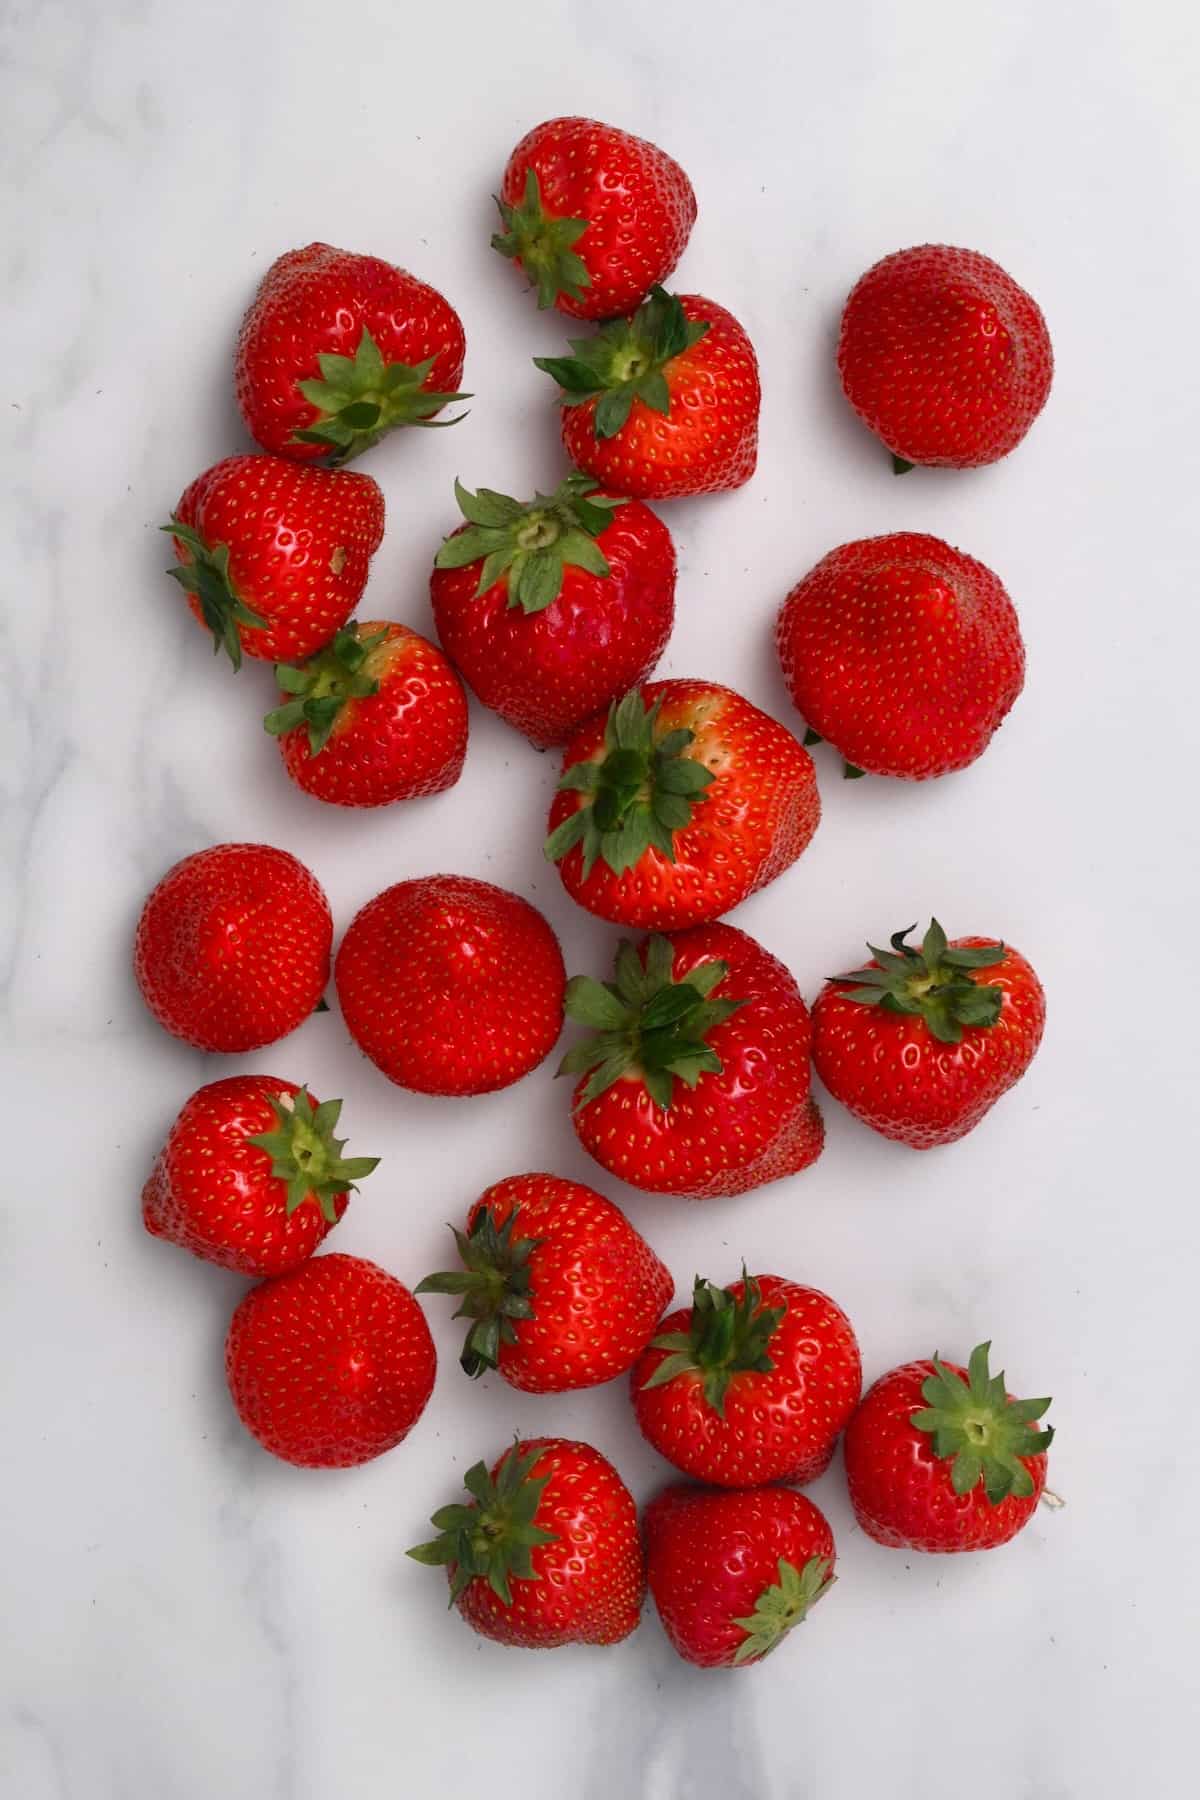 A bunch of strawberries on a flat surface